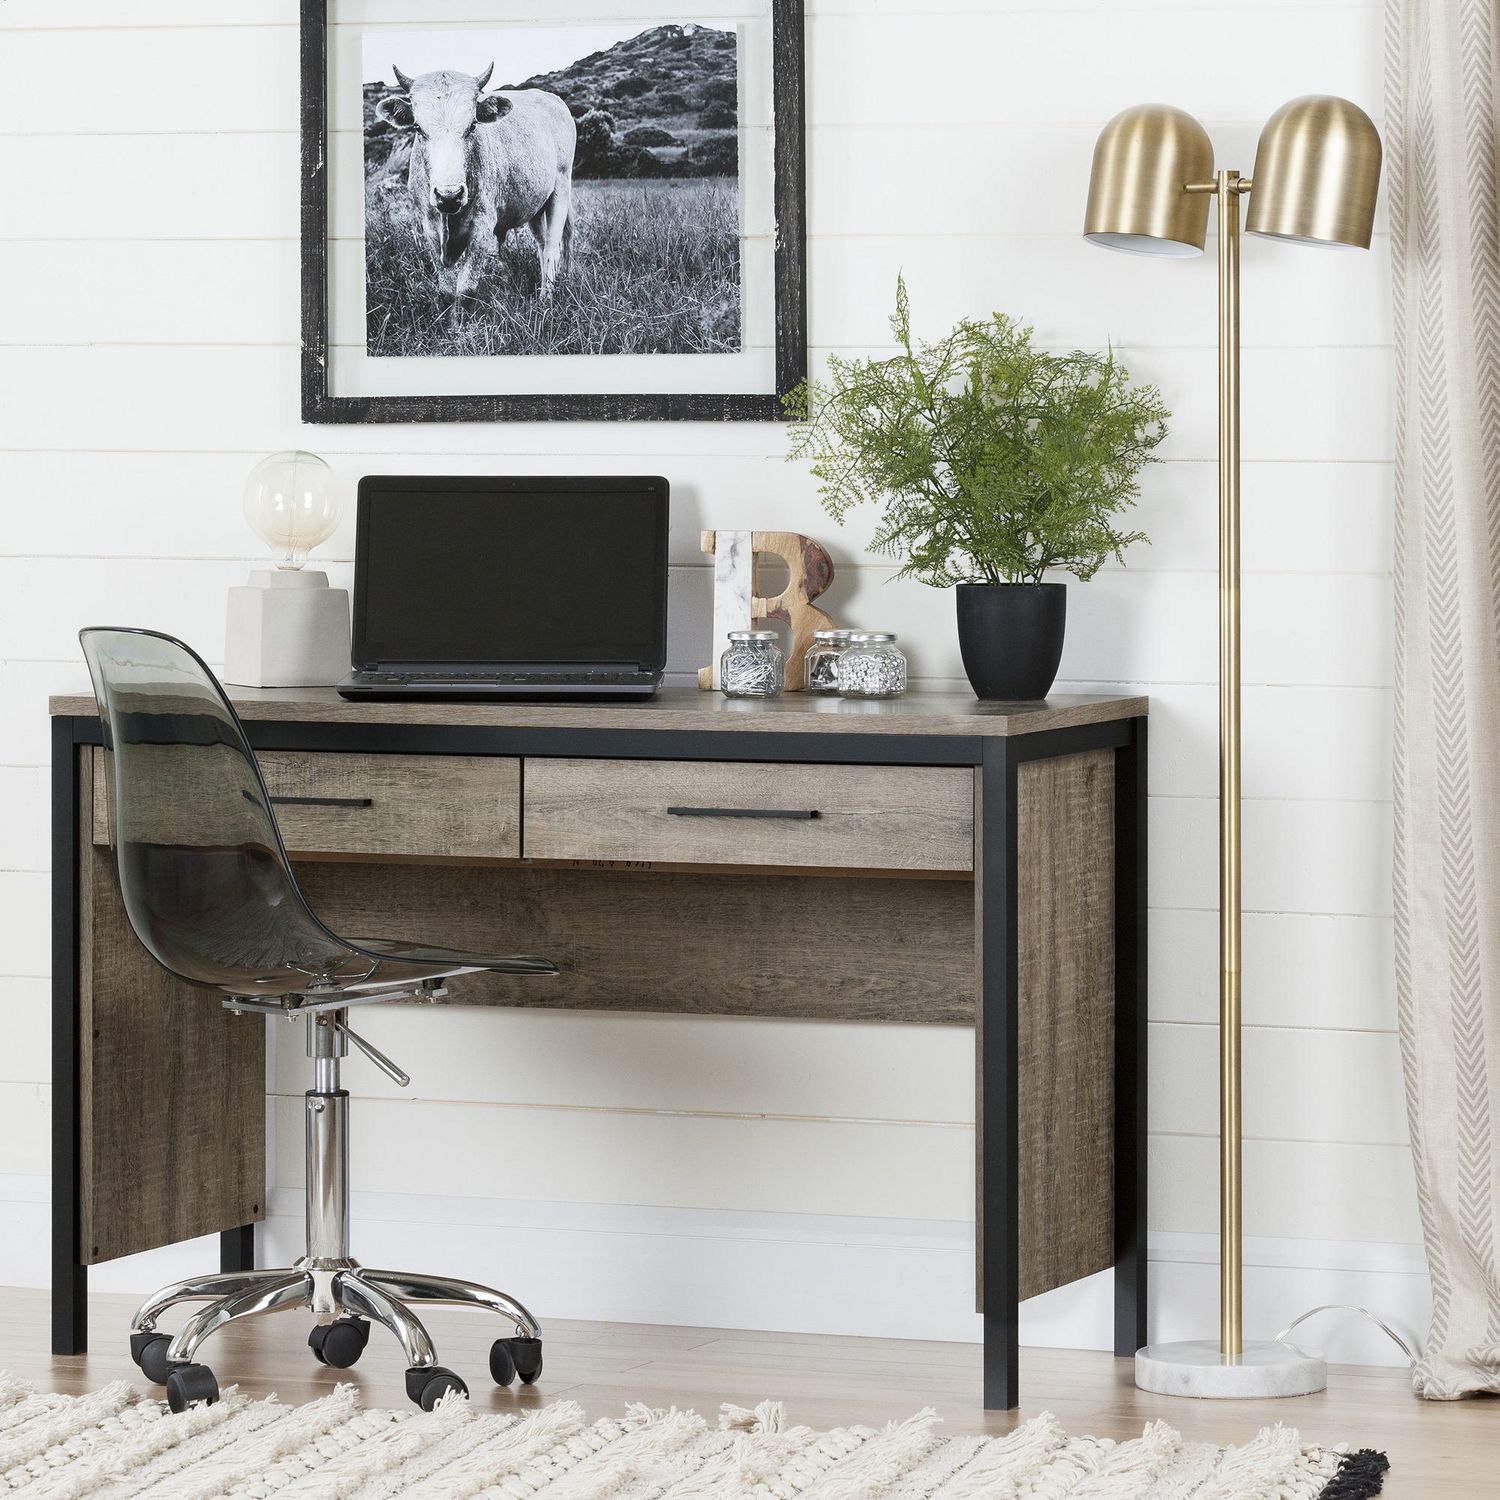 South Shore Munich Desk with Drawers, Weathered Oak And Matte Black ...